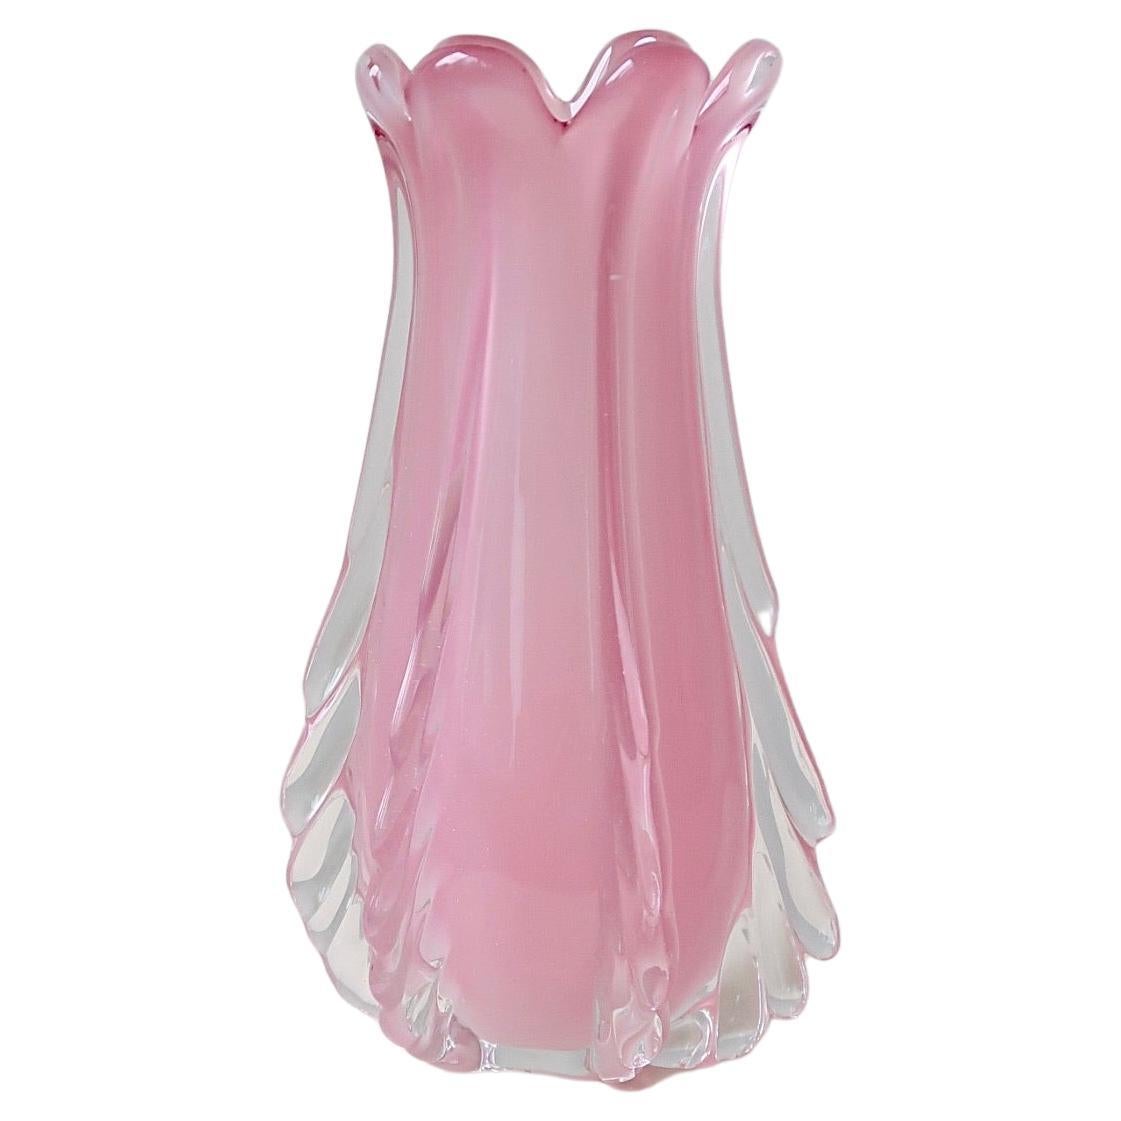 Large Vintage Murano Pink Ribbed Alabastro Opal Vase Mouth Blown Italian 1960s For Sale